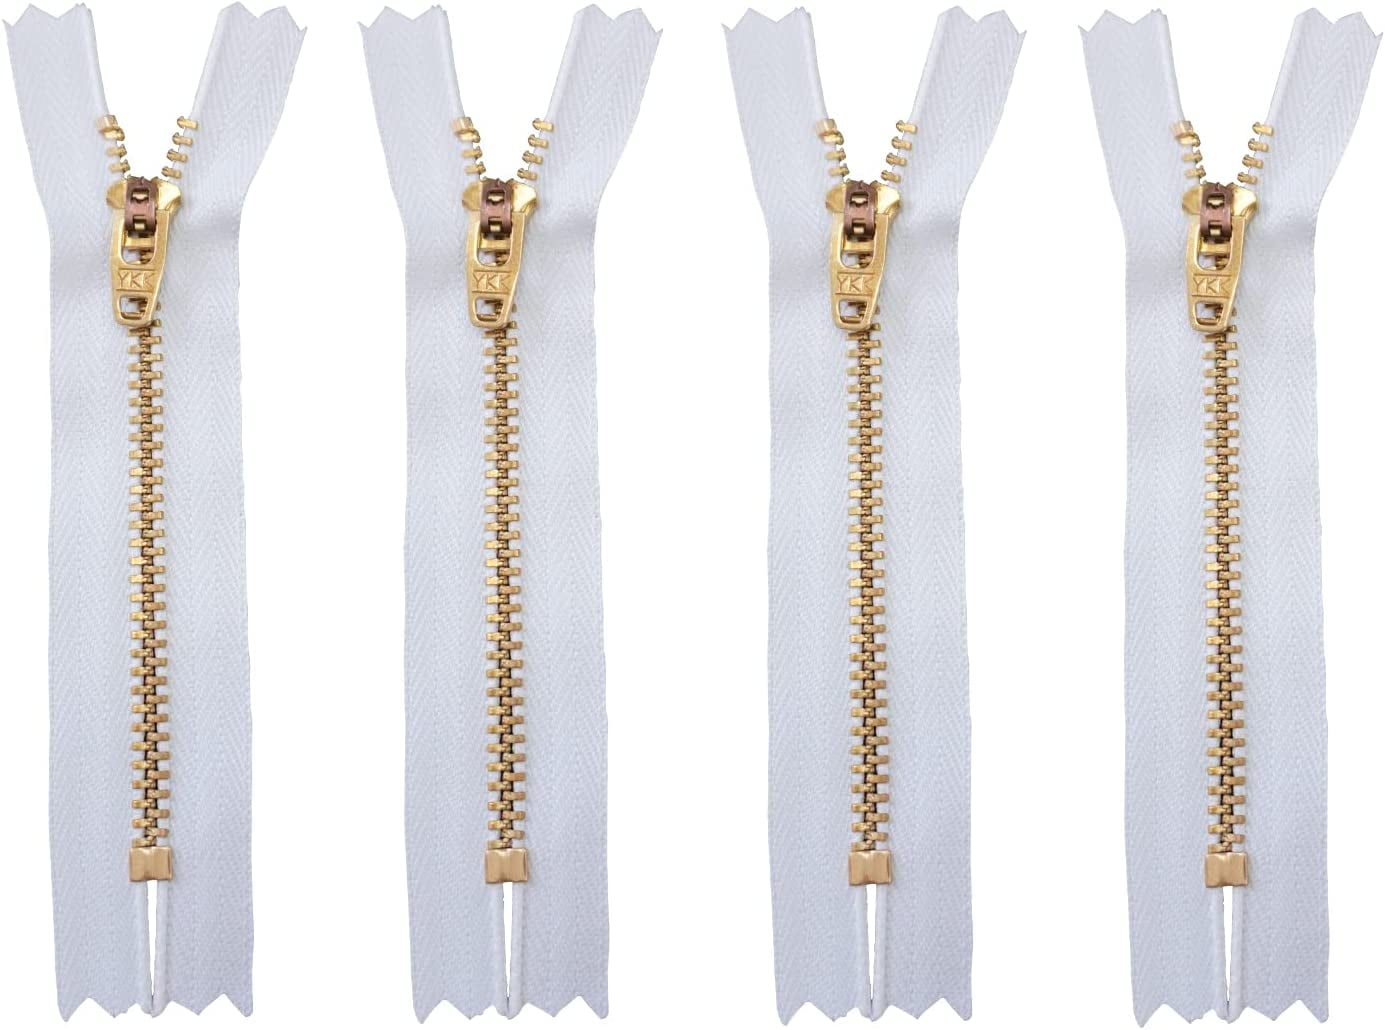  YKK Closed End Nylon White Zipper, Heavy Duty Sewing Zipper  Golden Brass Teeth/Head Durable Zip for Denim Clothes, Jeans, Trousers,  Purses, 8 Inch (20cm), 1pc : Everything Else